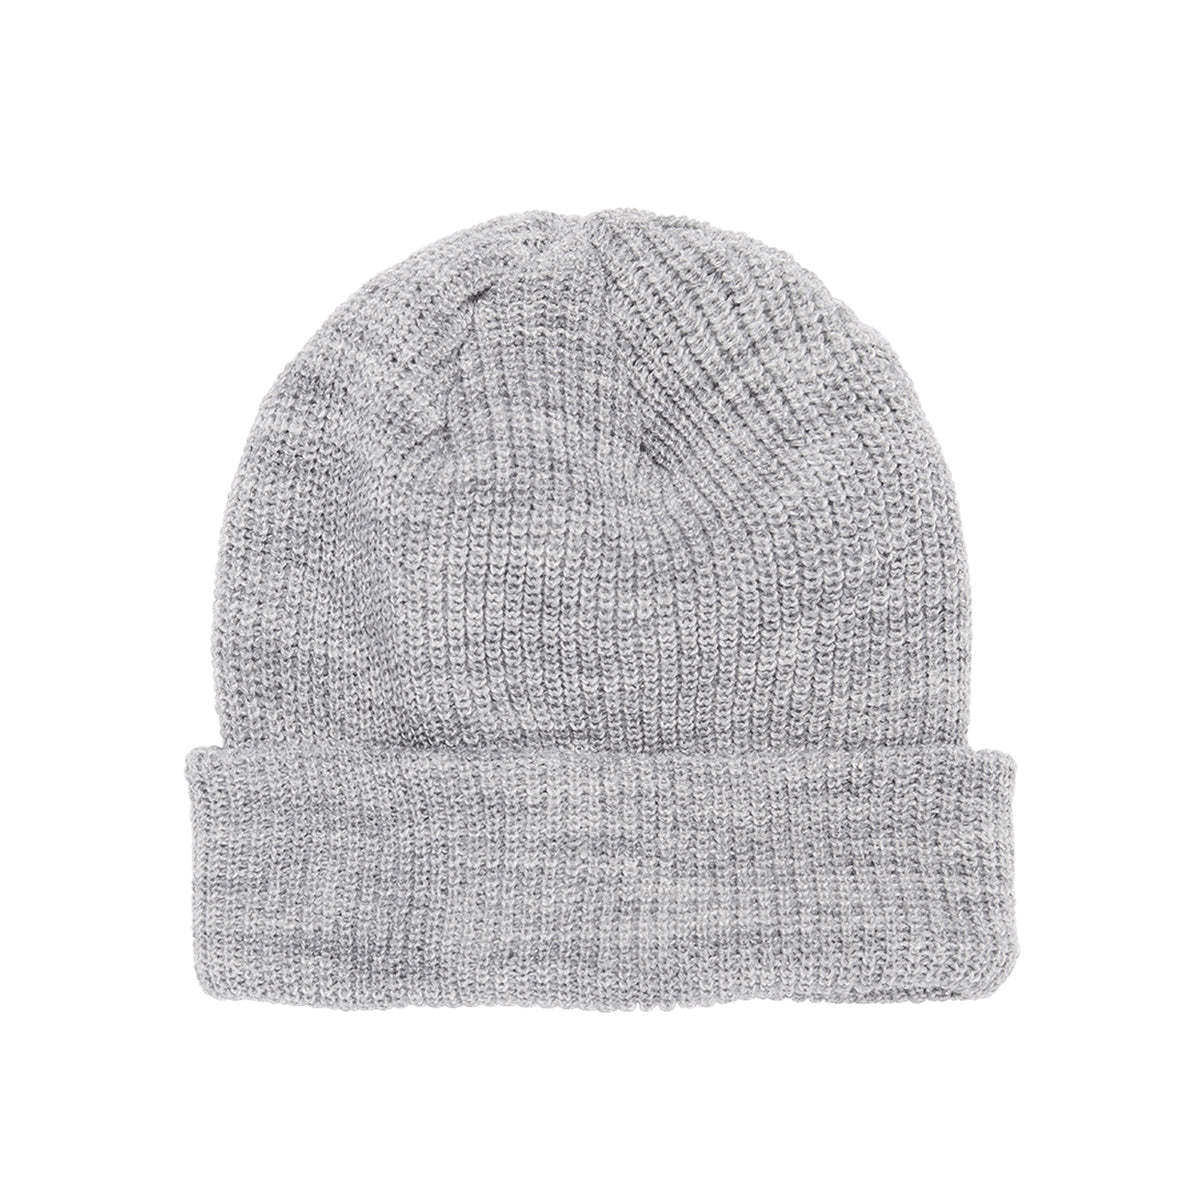 Knit Beanies Ribbed – Beanie and Cuff Blank | Beanies Flexfit Knit Beanie 2040USA Wholesale Cuffed Custom, : Knit Yupoong-Ribbed